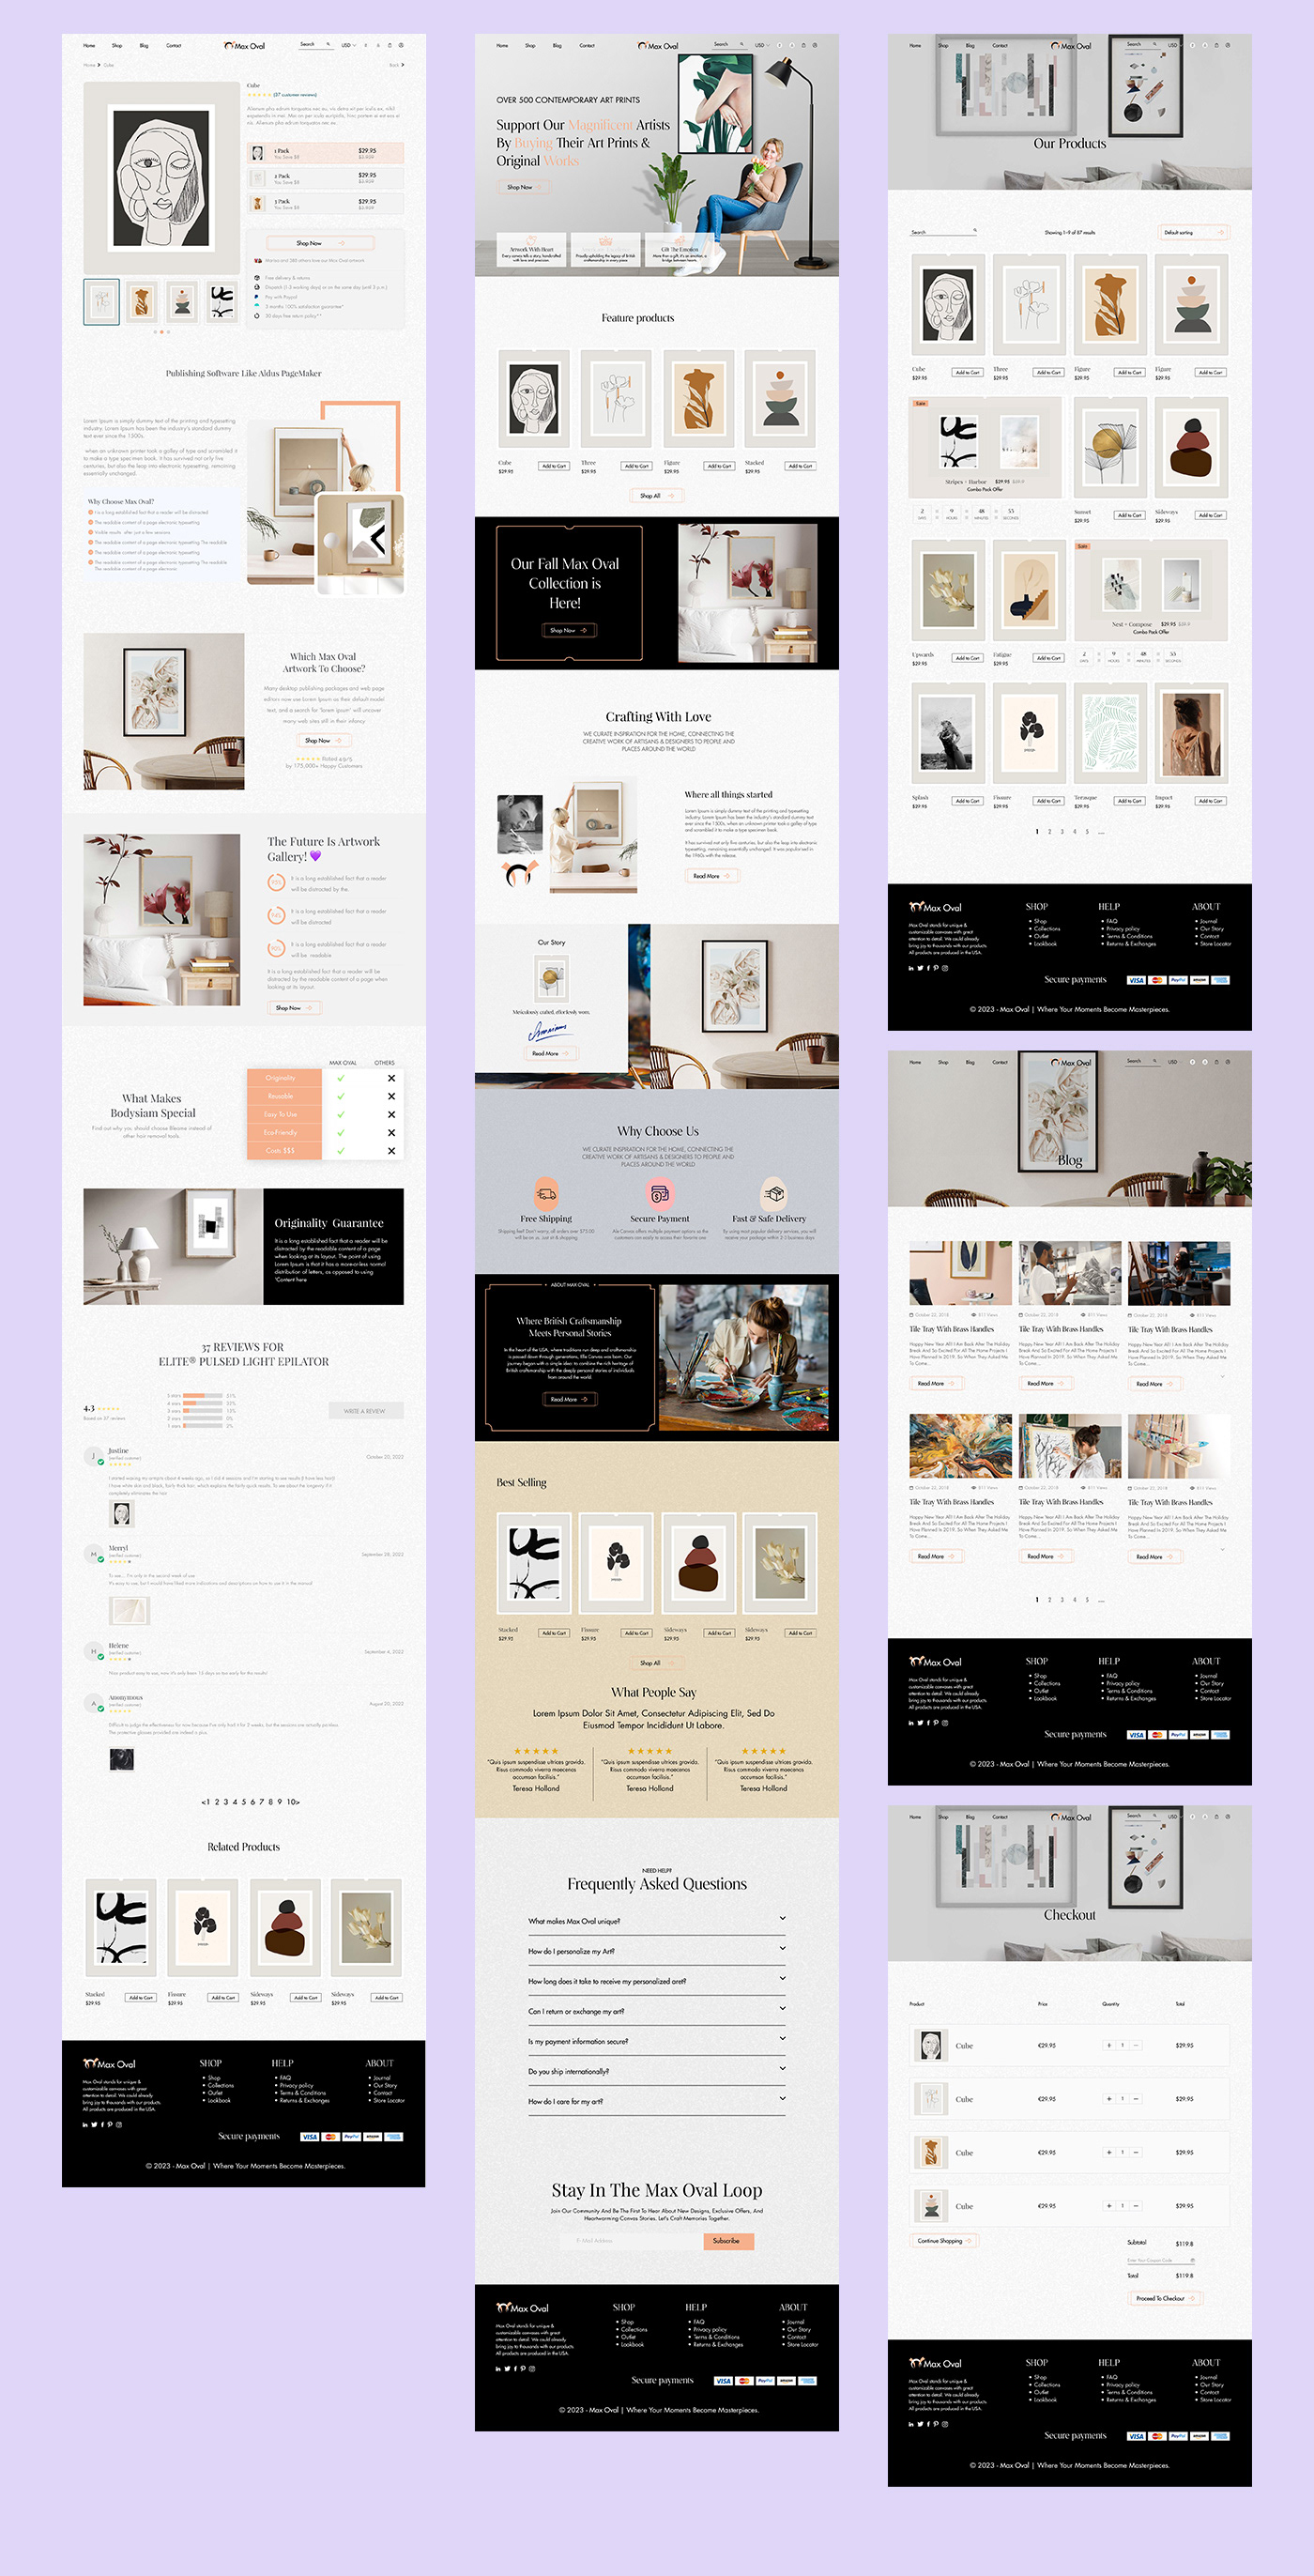 Shopify shopify store shopify store design Shopify website Shopify dropshipping store Ecommerce Figma shop Web Design 